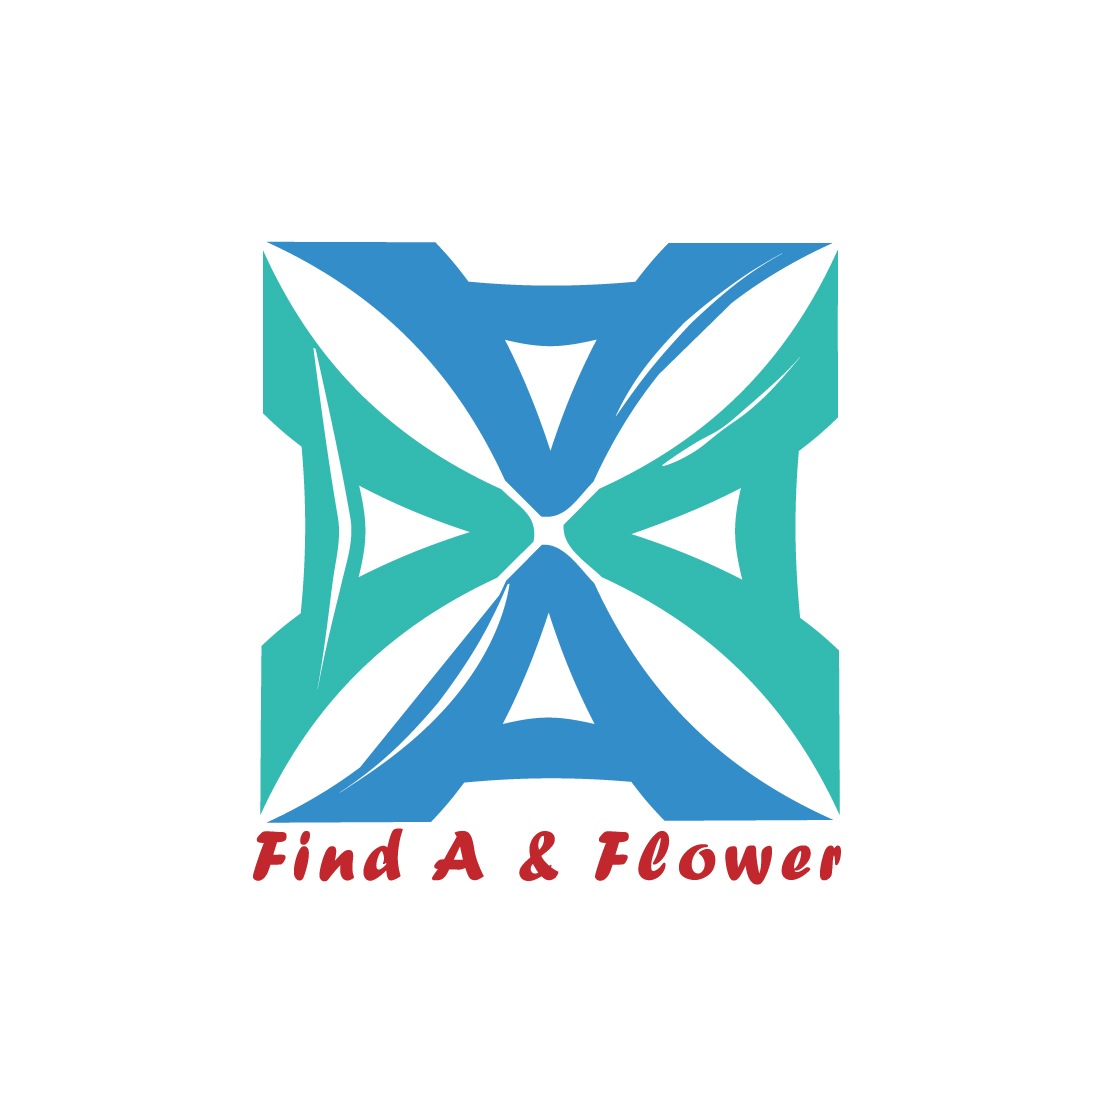 Find A and Flower - TShirt Design cover image.